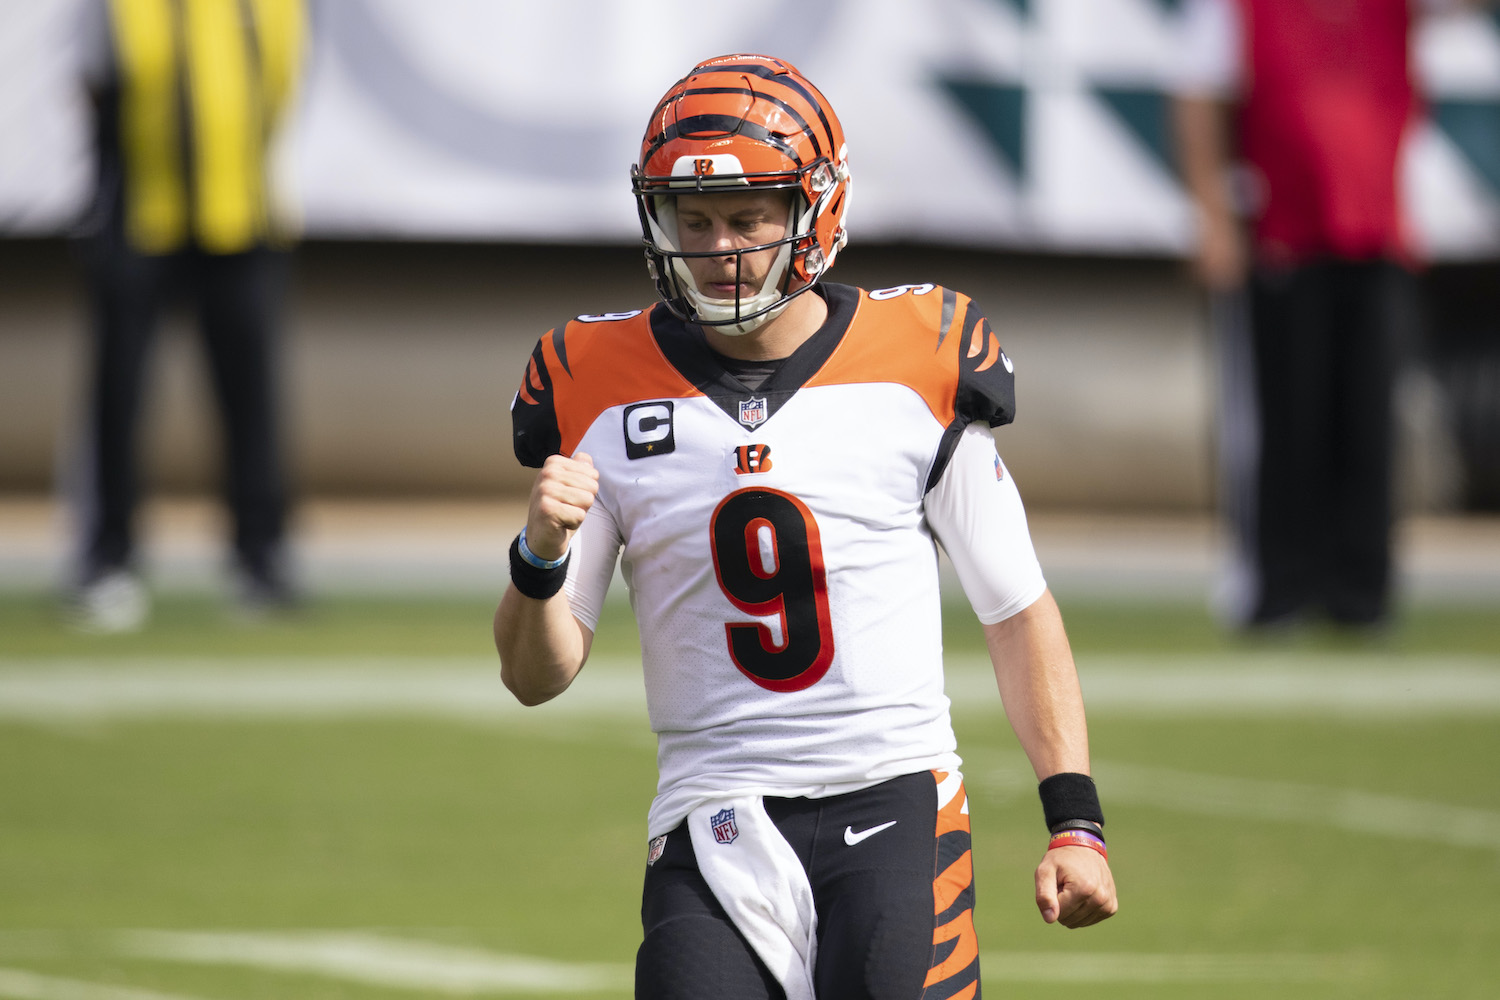 Joe Burrow's talent as a quarterback is undeniable, but his talent might be a curse that sets back the Bengals for years.